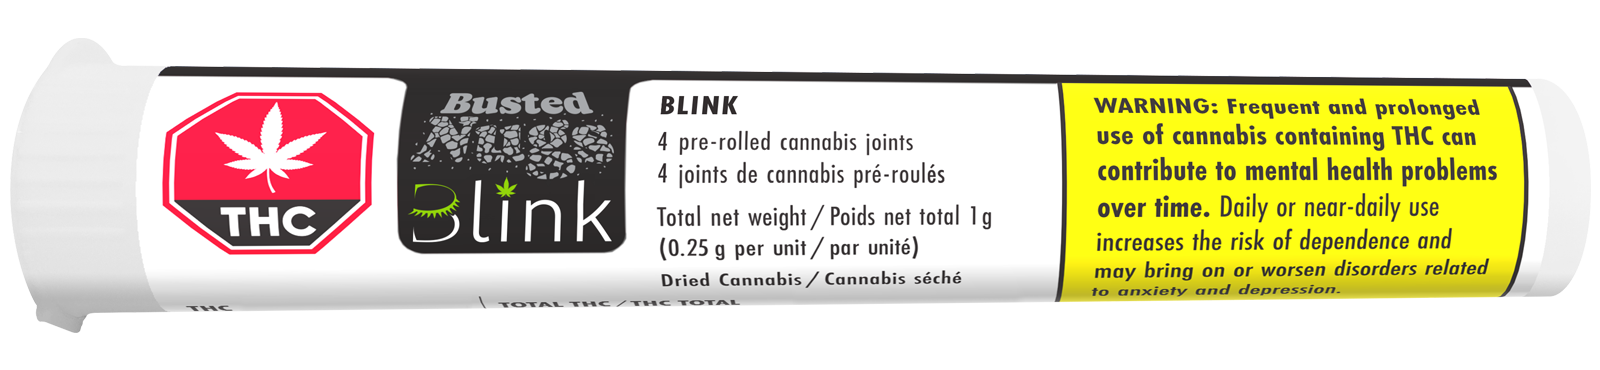 Busted Nugs - Pre-Rolled Blink